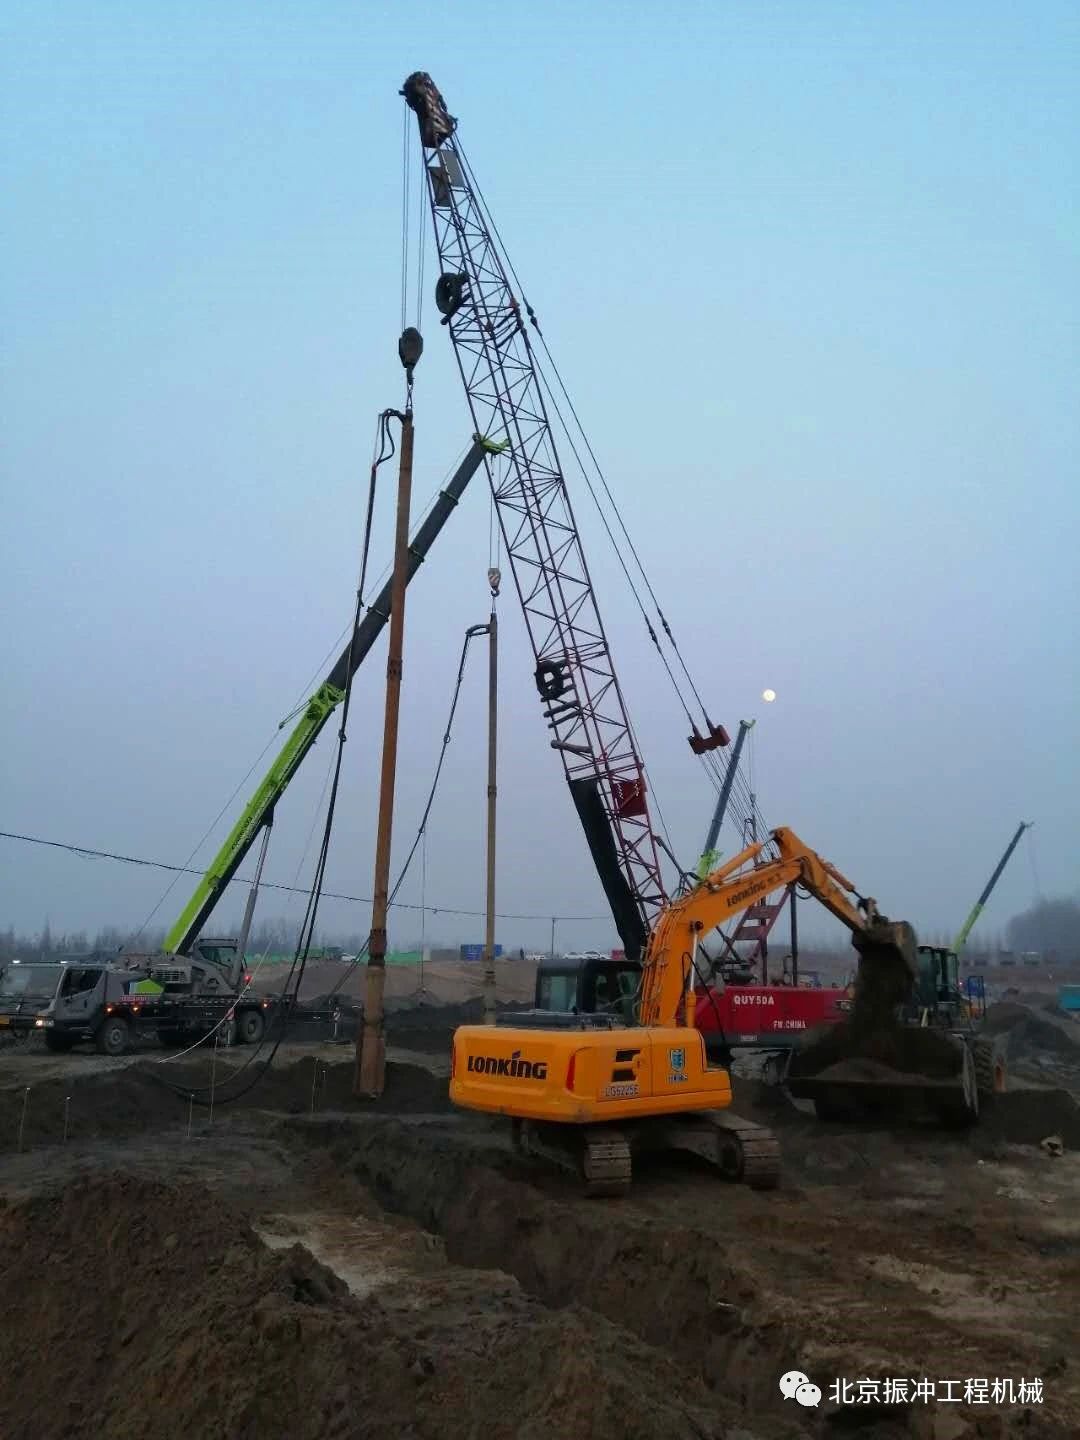 BVEM | CaoDian Rubber Dam project vibro-replacement stone column construction on north canal XiangHe period